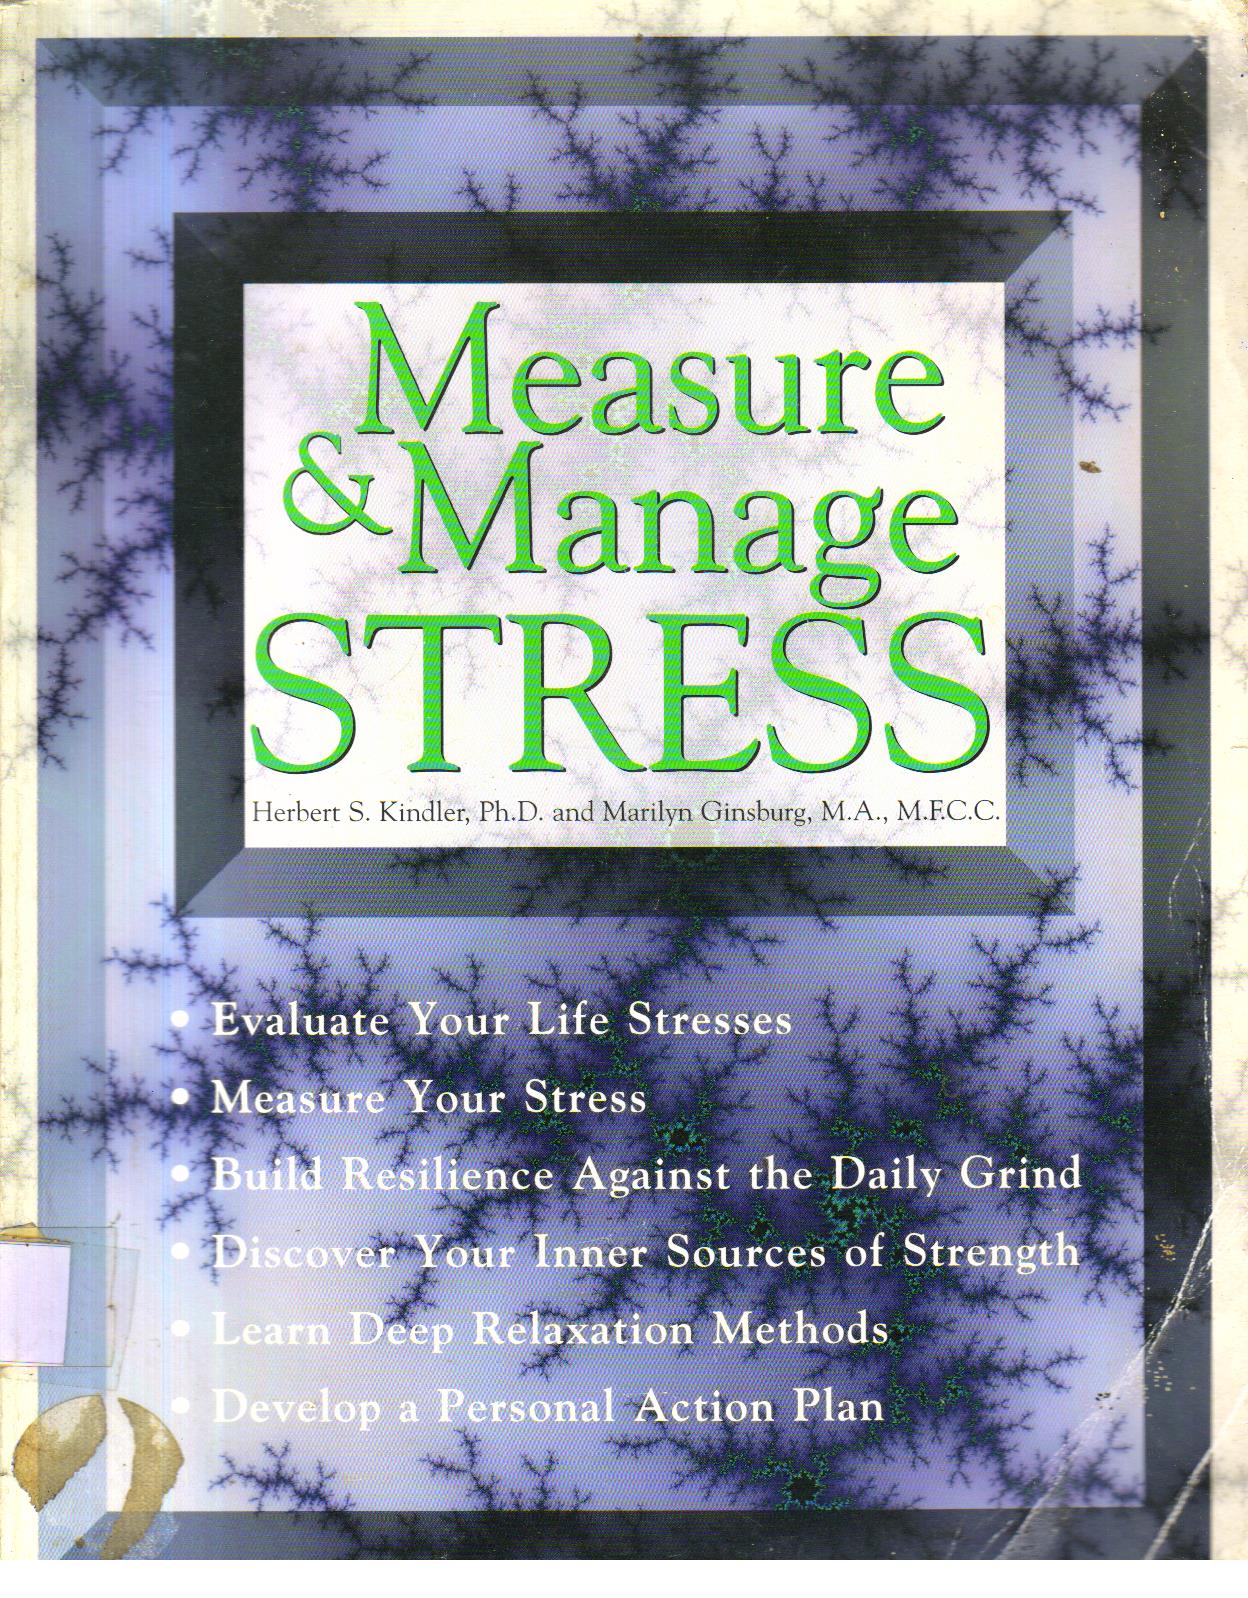 Measure and Manage Stress.